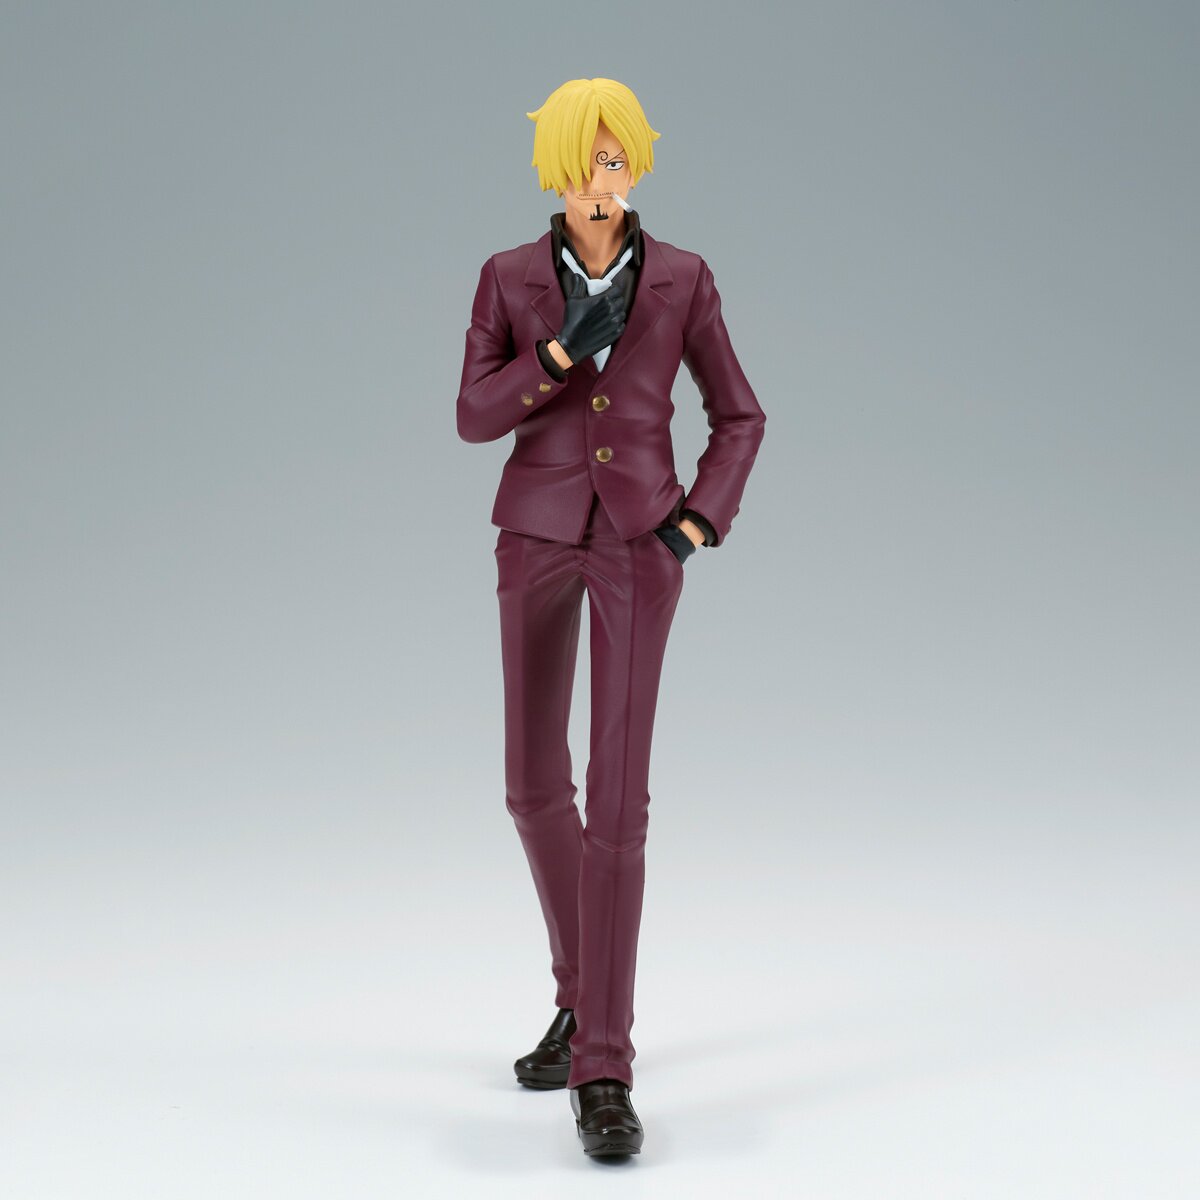 One Piece: Cool Details About Sanji's Clothes